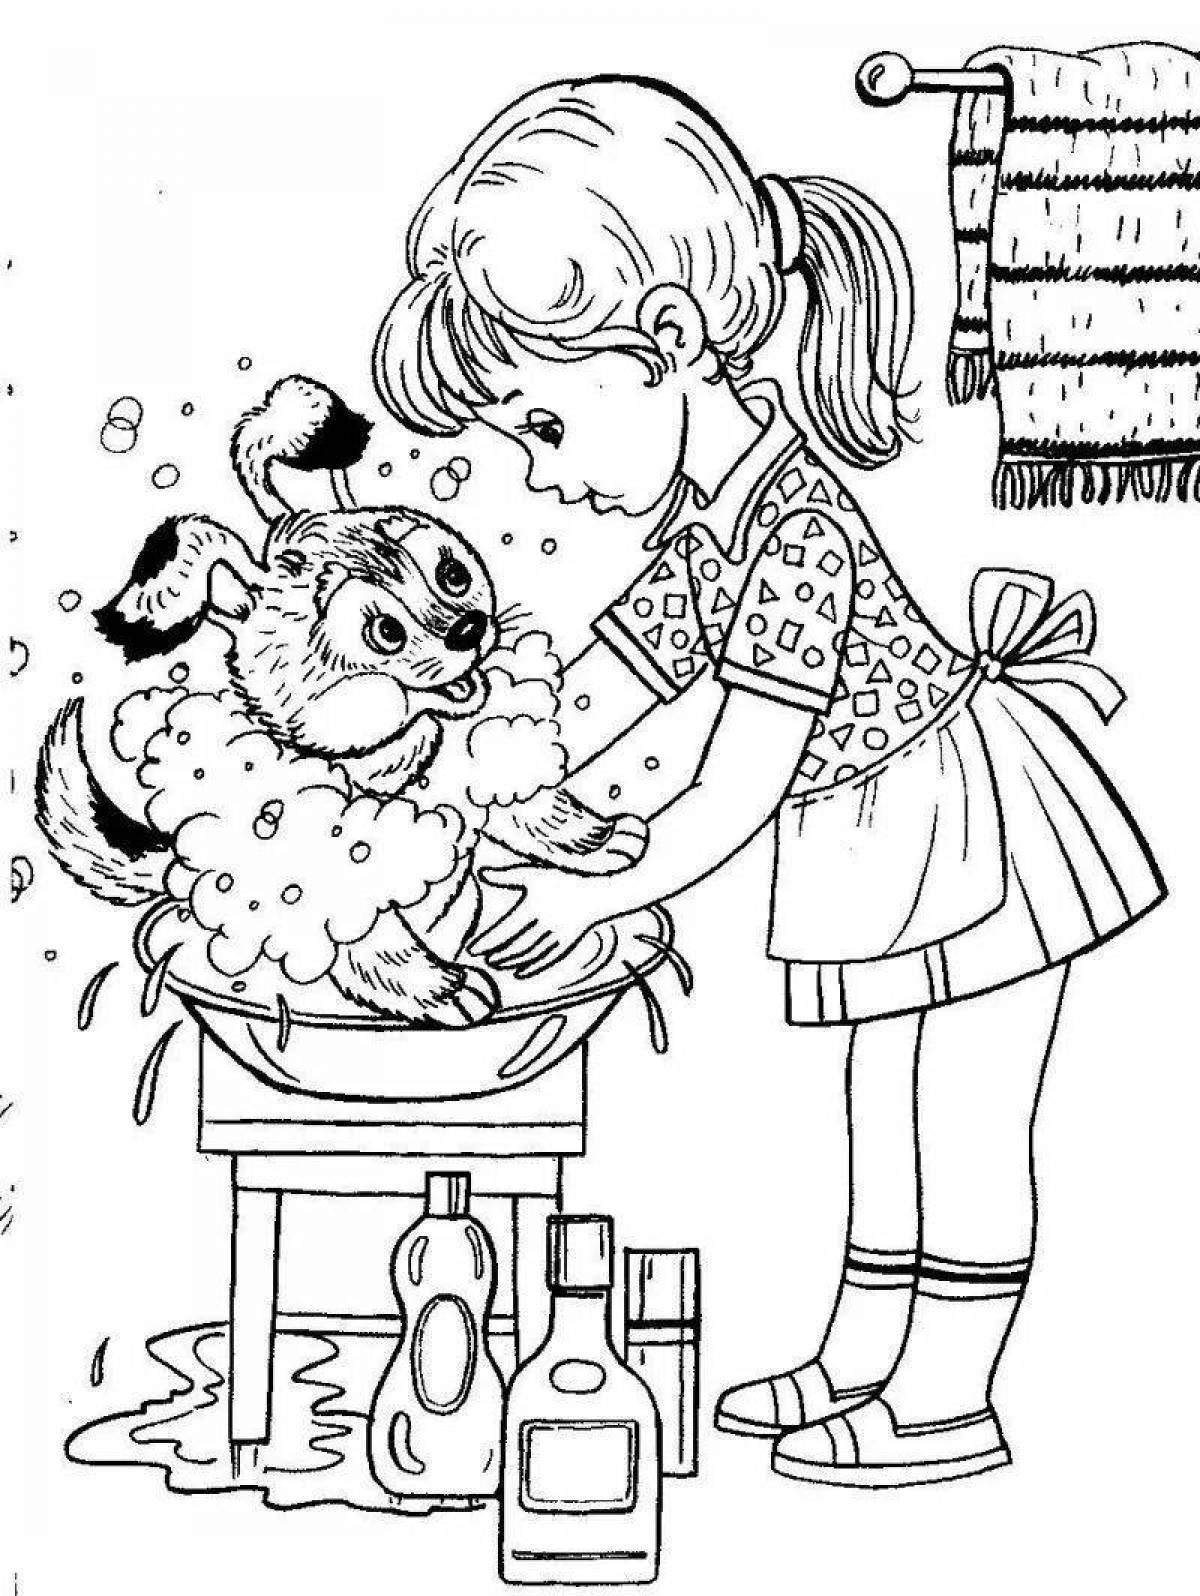 Wonderful deeds for kids coloring pages